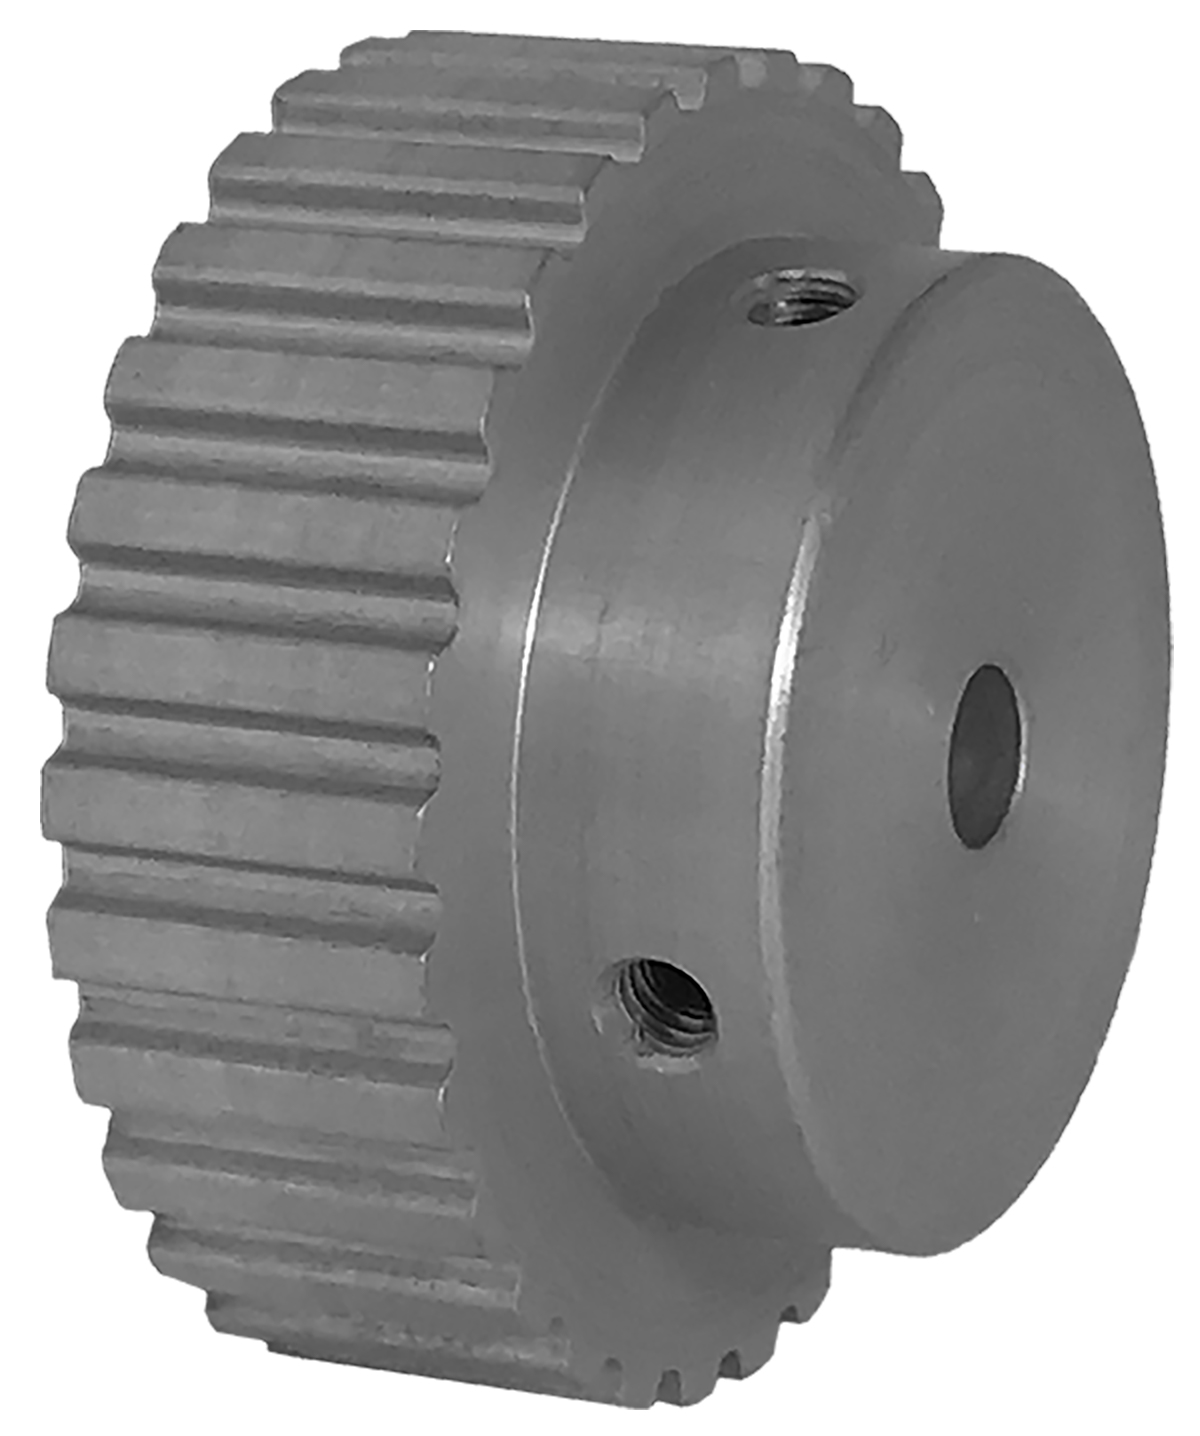 30XL037-6A3 - Aluminum Imperial Pitch Pulleys